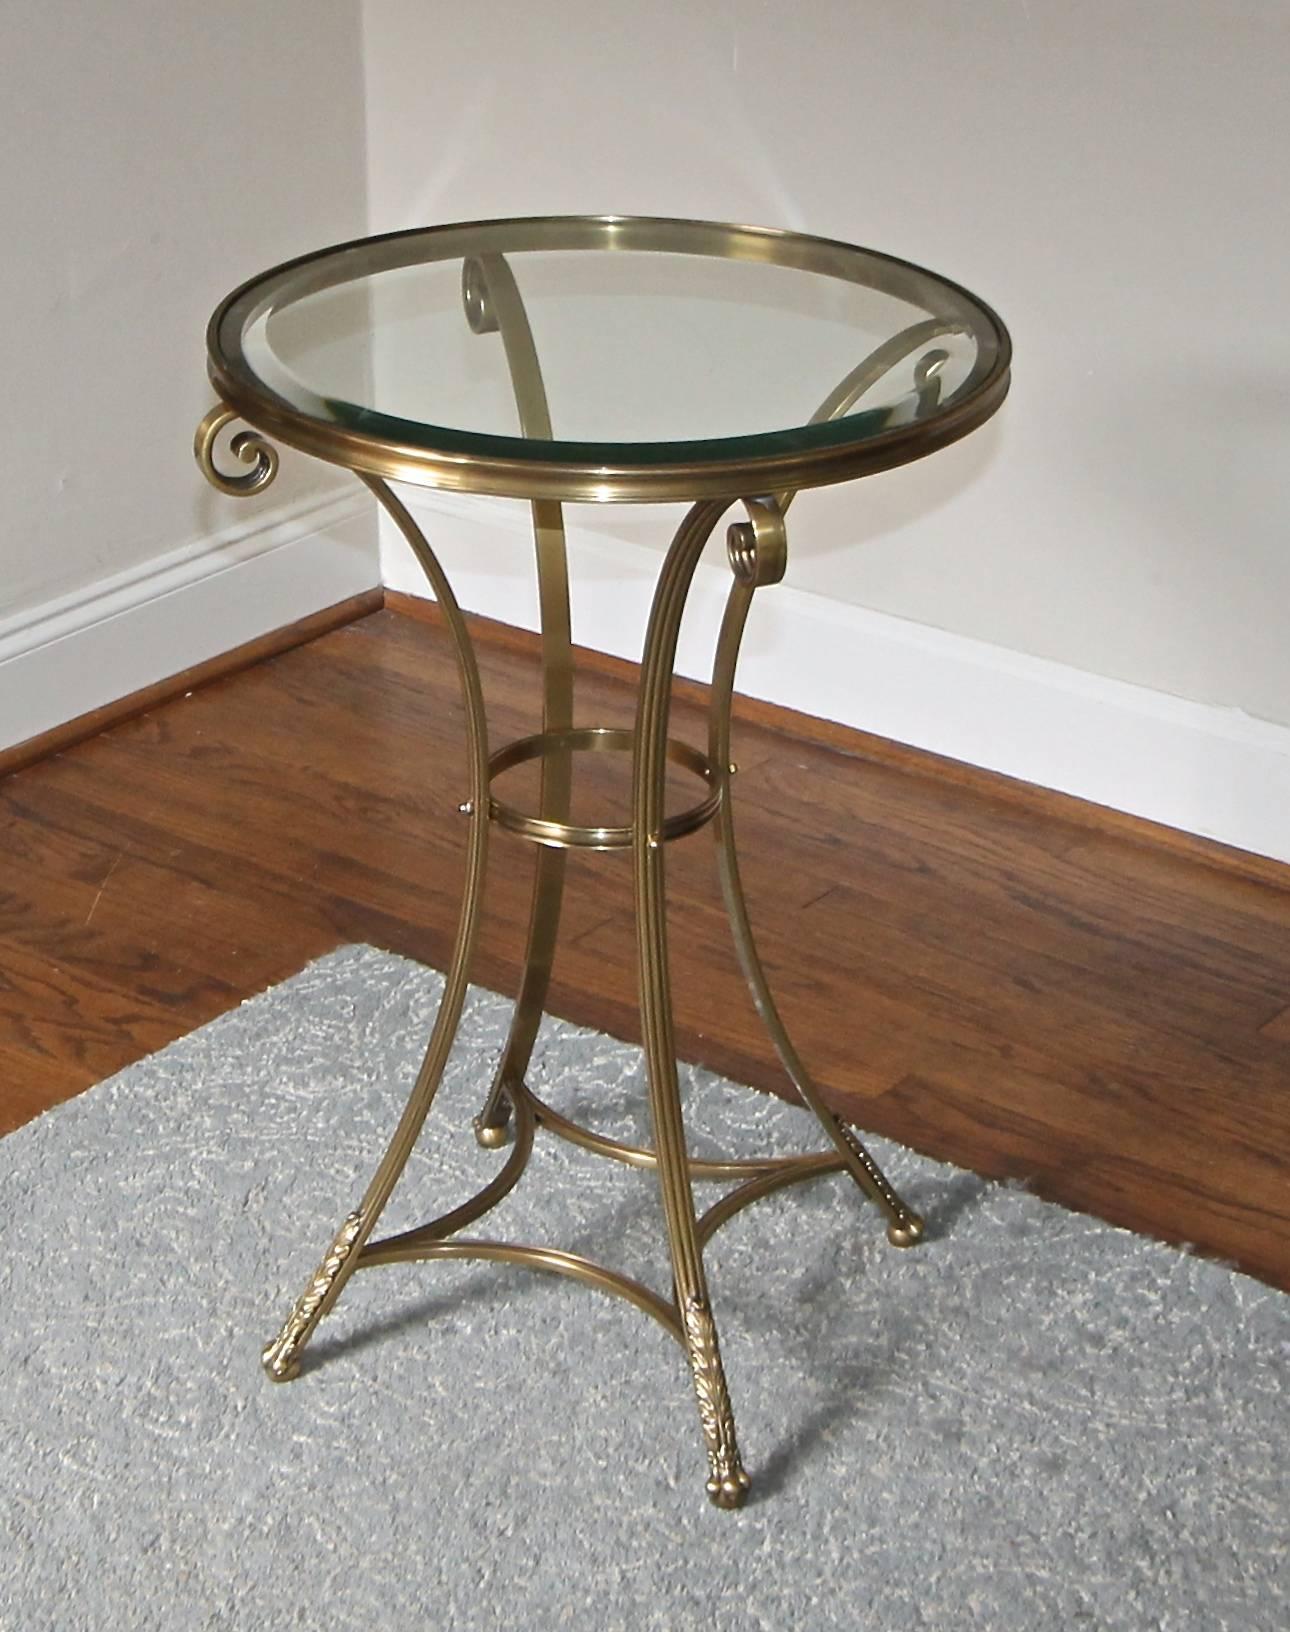 A taller neoclassic style round brass gueridon side or end table with inset bevelled glass table. Well-crafted with nicely detailed paw feet and acanthus leaf details.